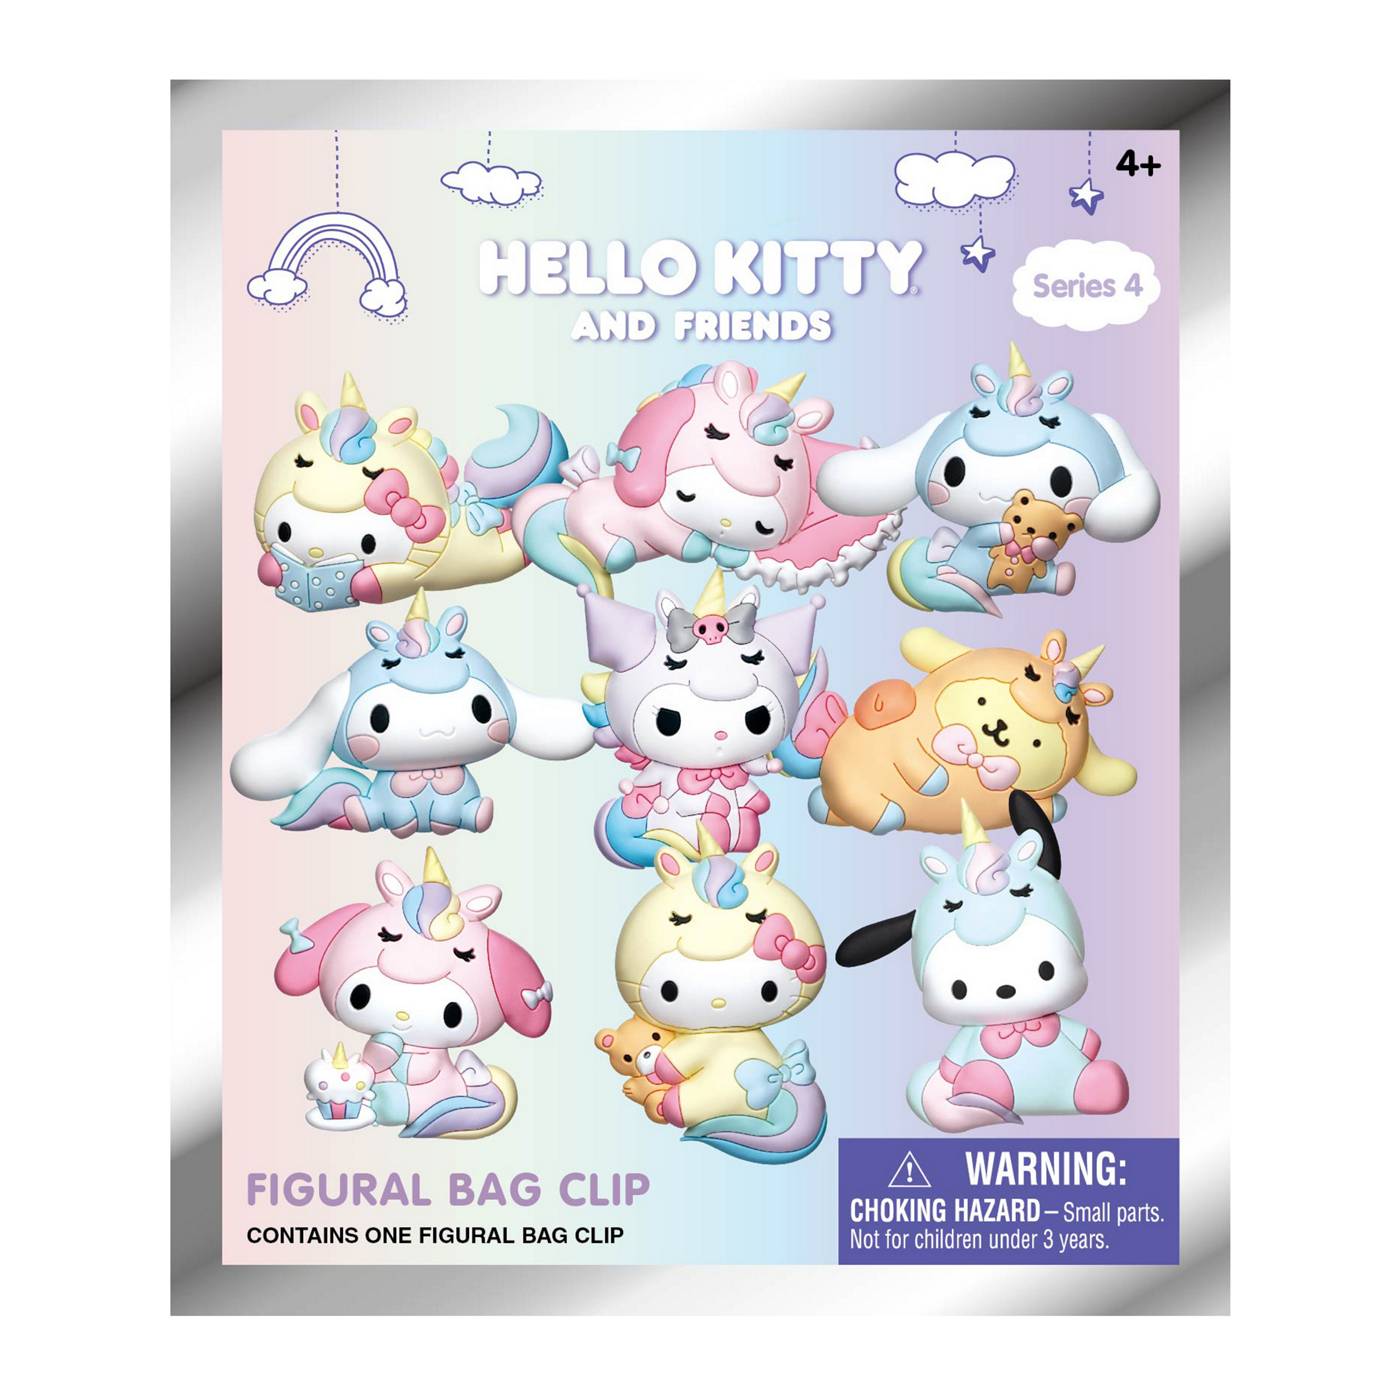 Monogram International Hello Kitty And Friends Figural Bag Clip - Series 4; image 1 of 3